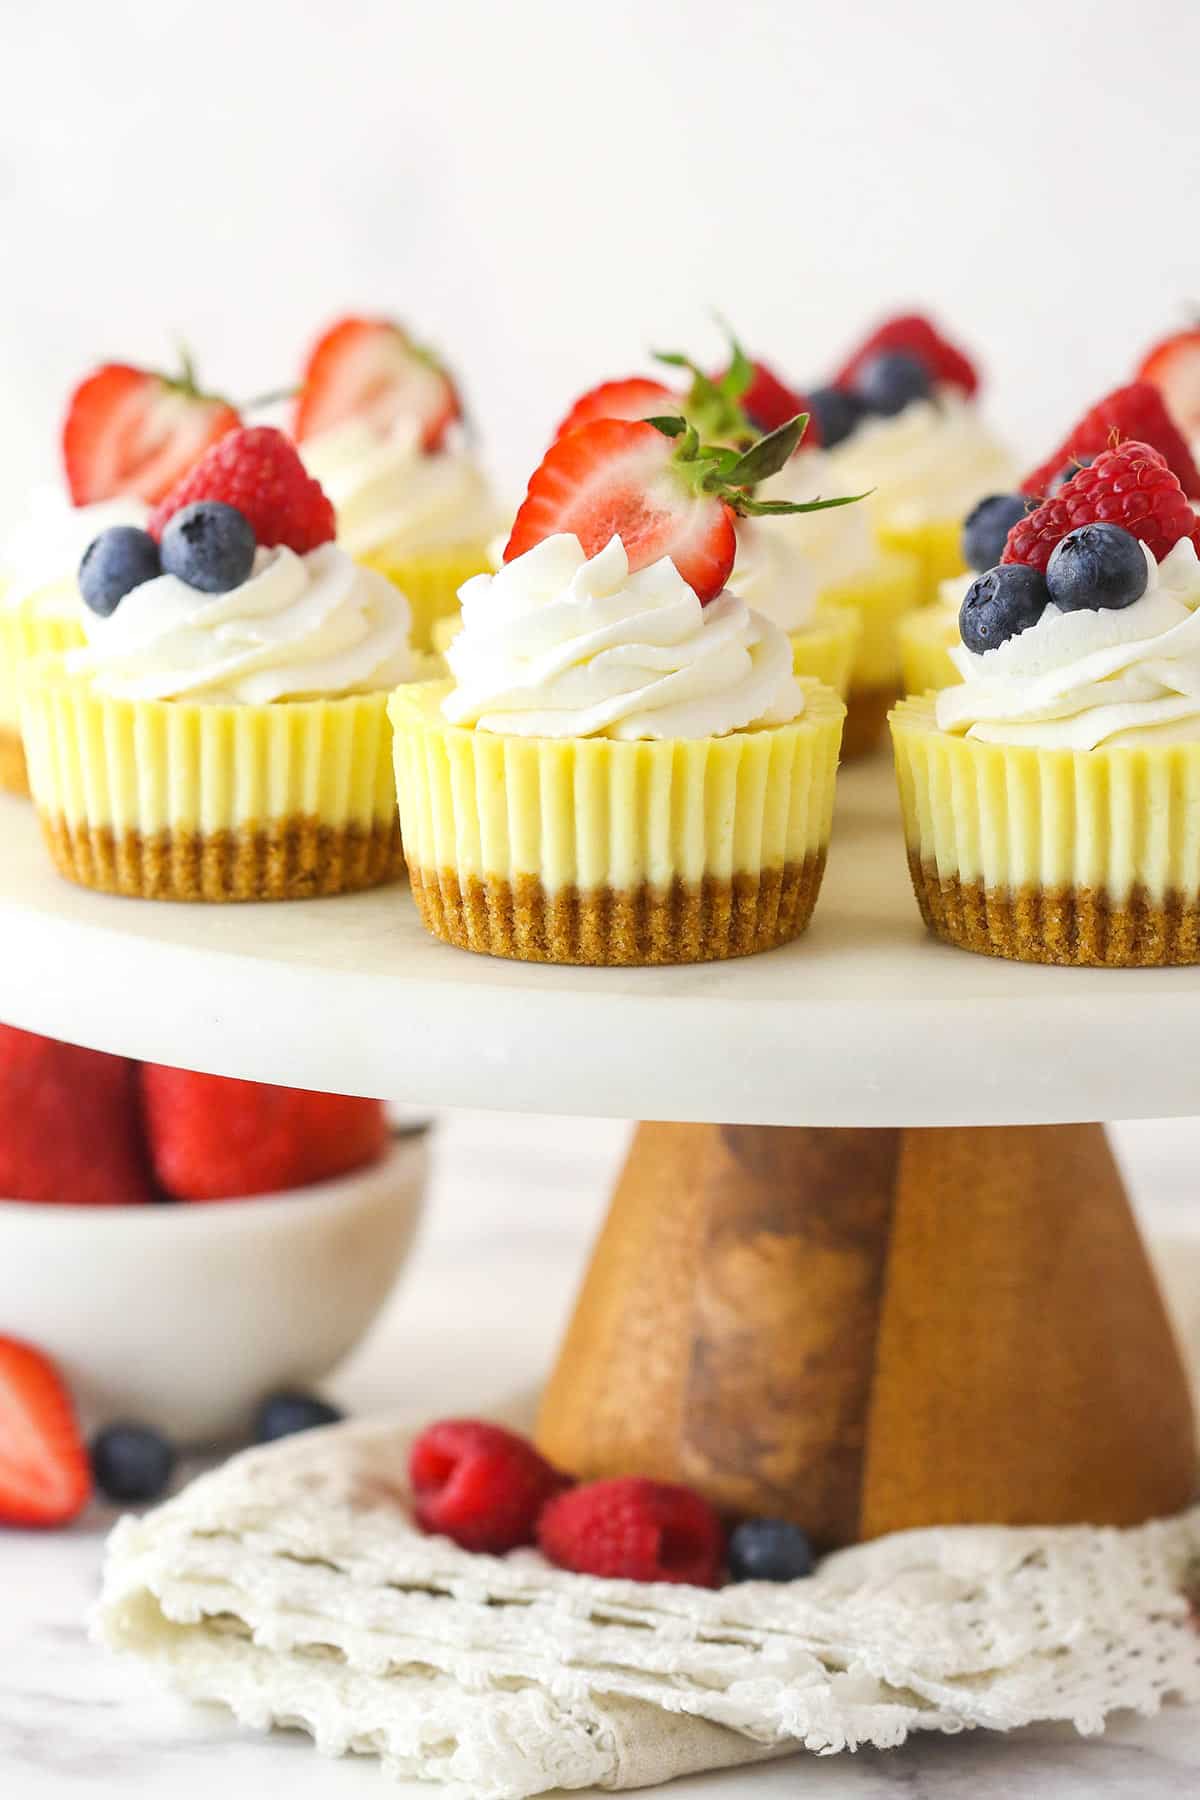 Mini cheesecakes on a cakes stand near a bowl of fresh berries.